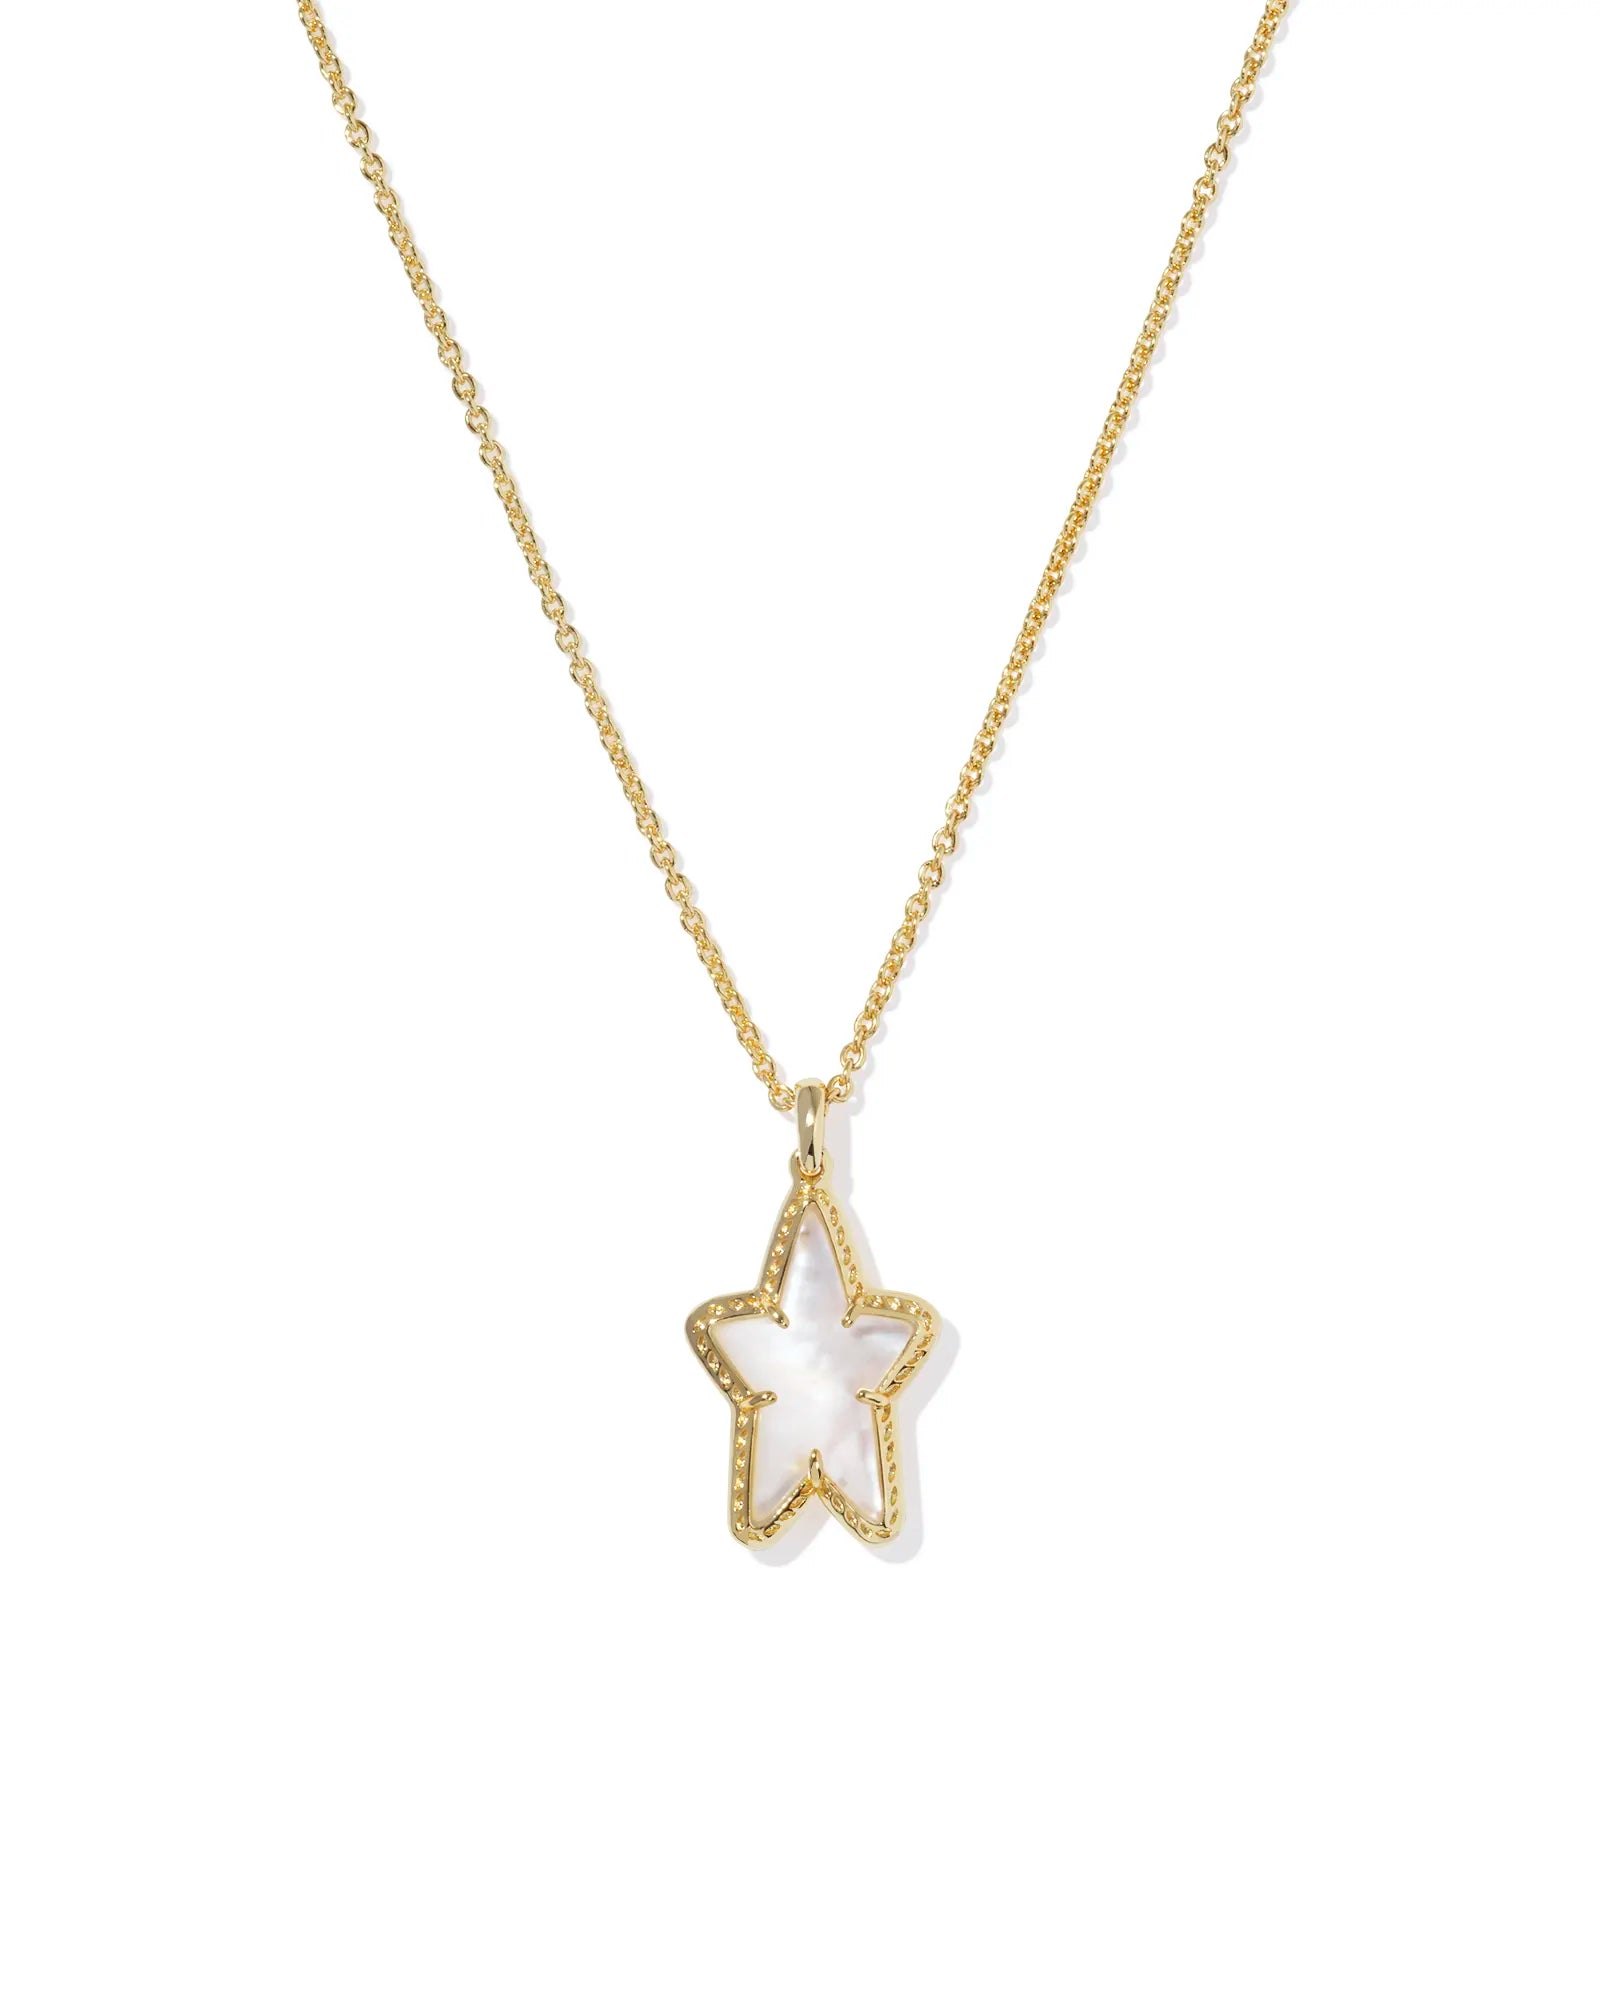 ADA STAR SHORT PENDANT NECKLACE - GOLD IVORY MOTHER OF PEARL